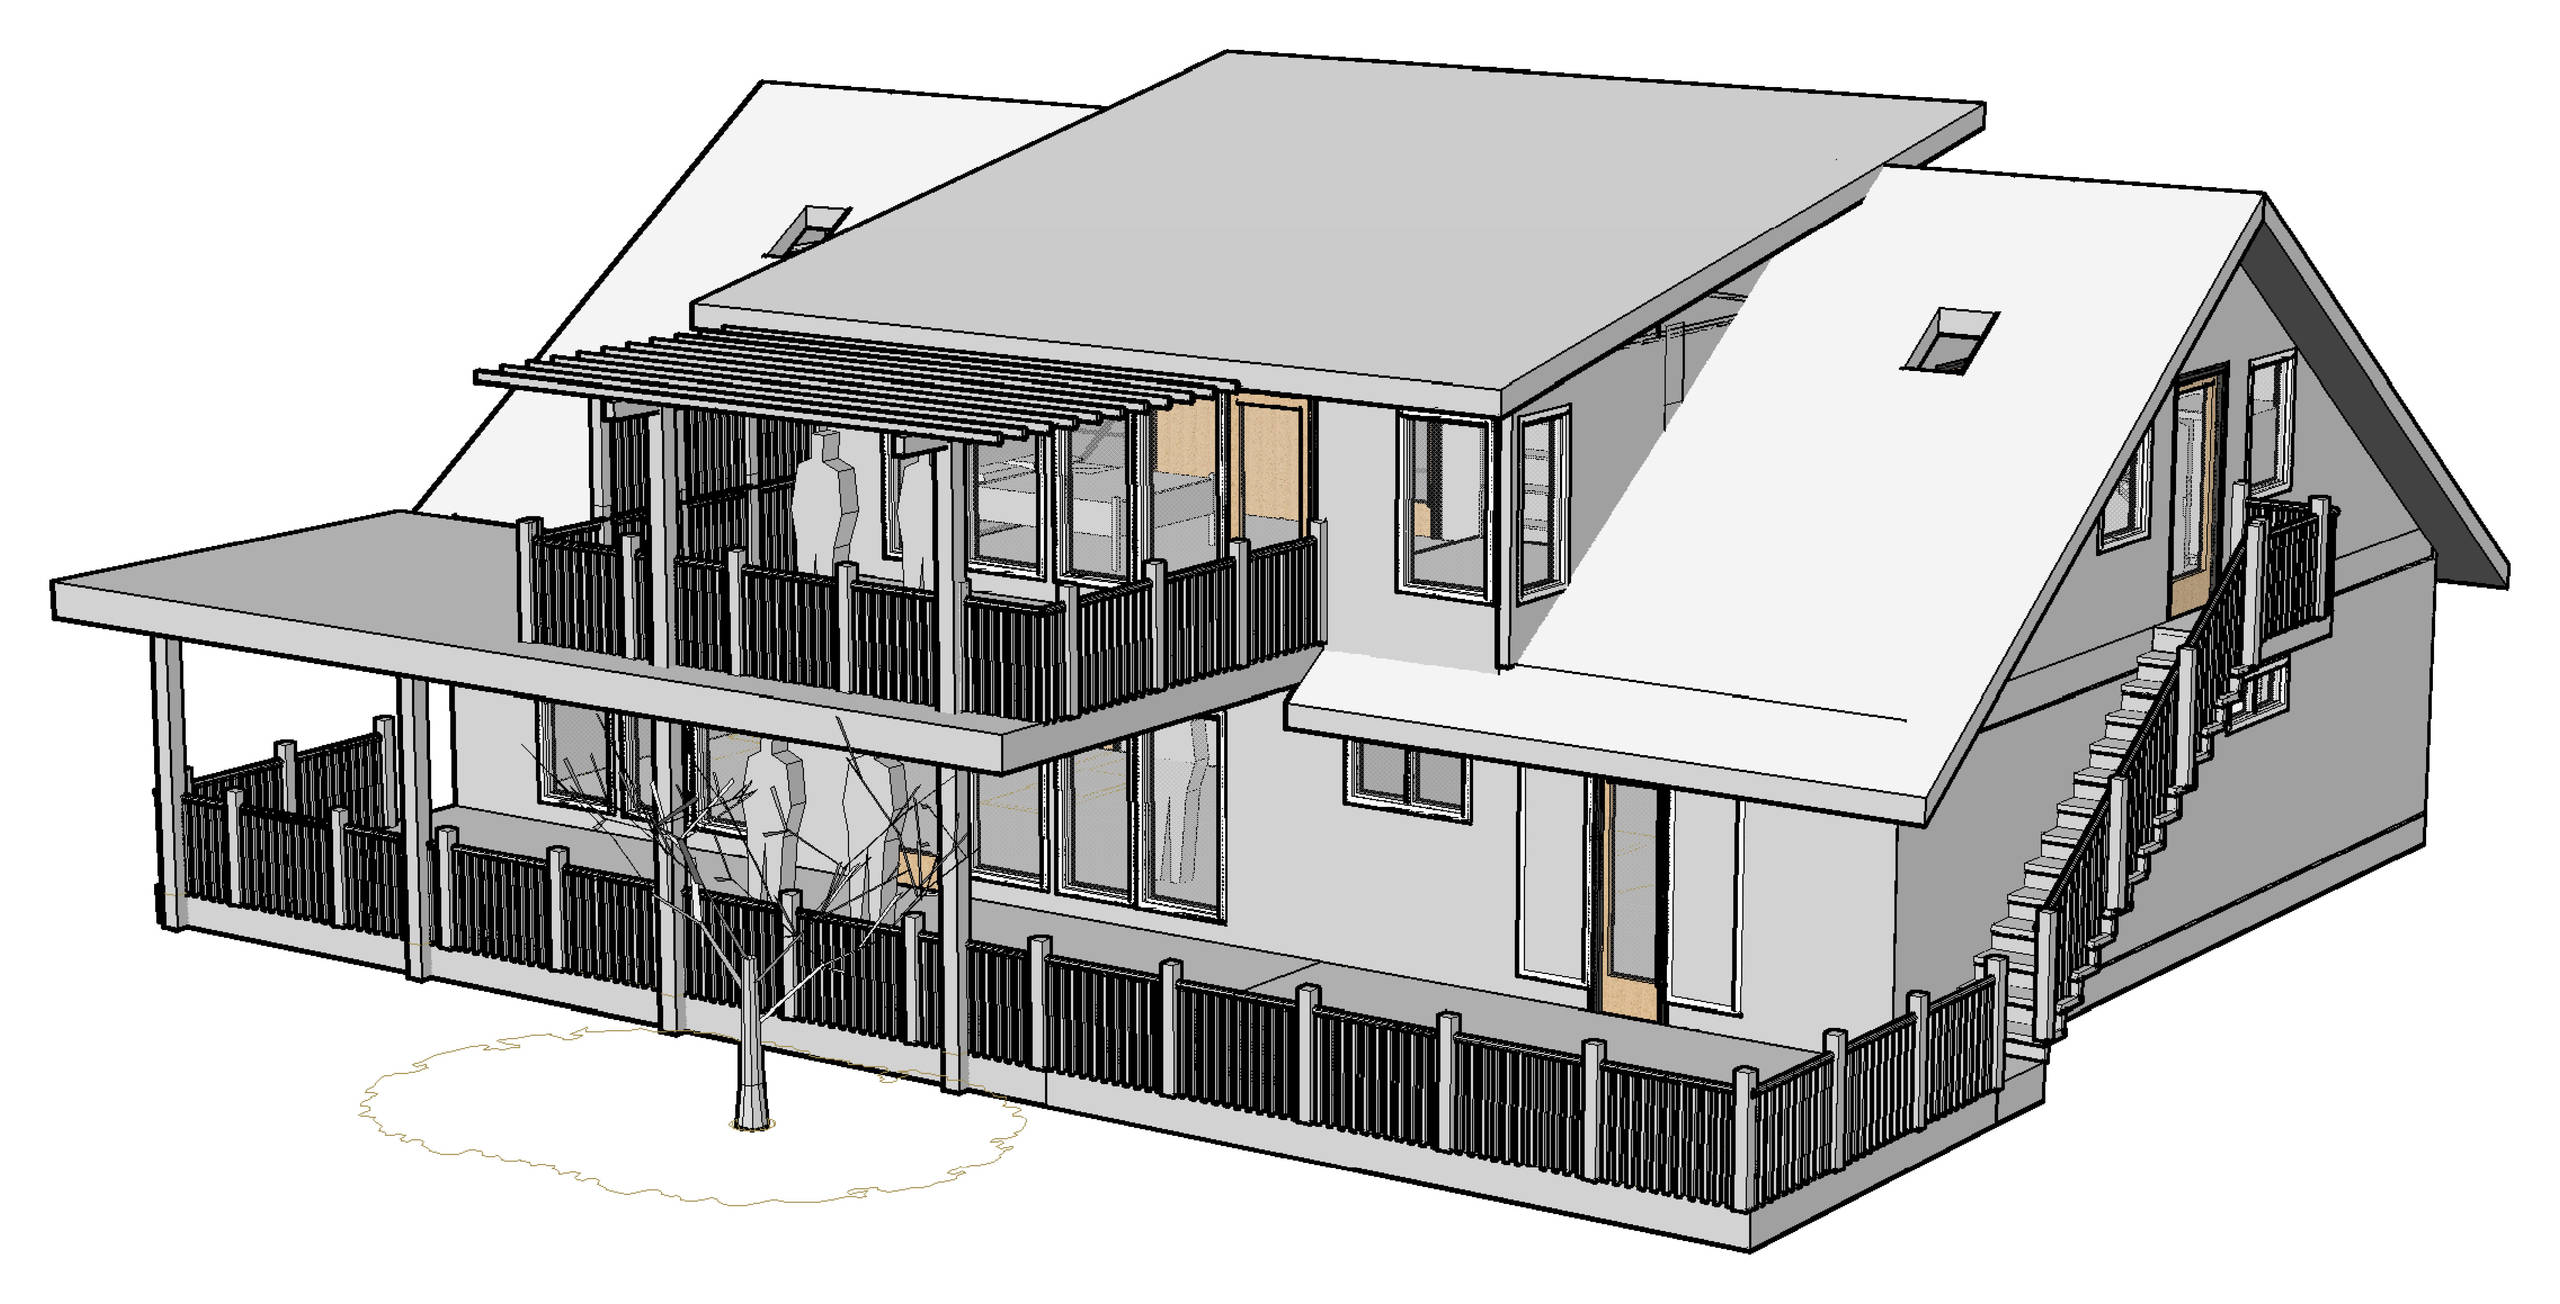 Backyard View of lower and upper decks and upper pop-up addition